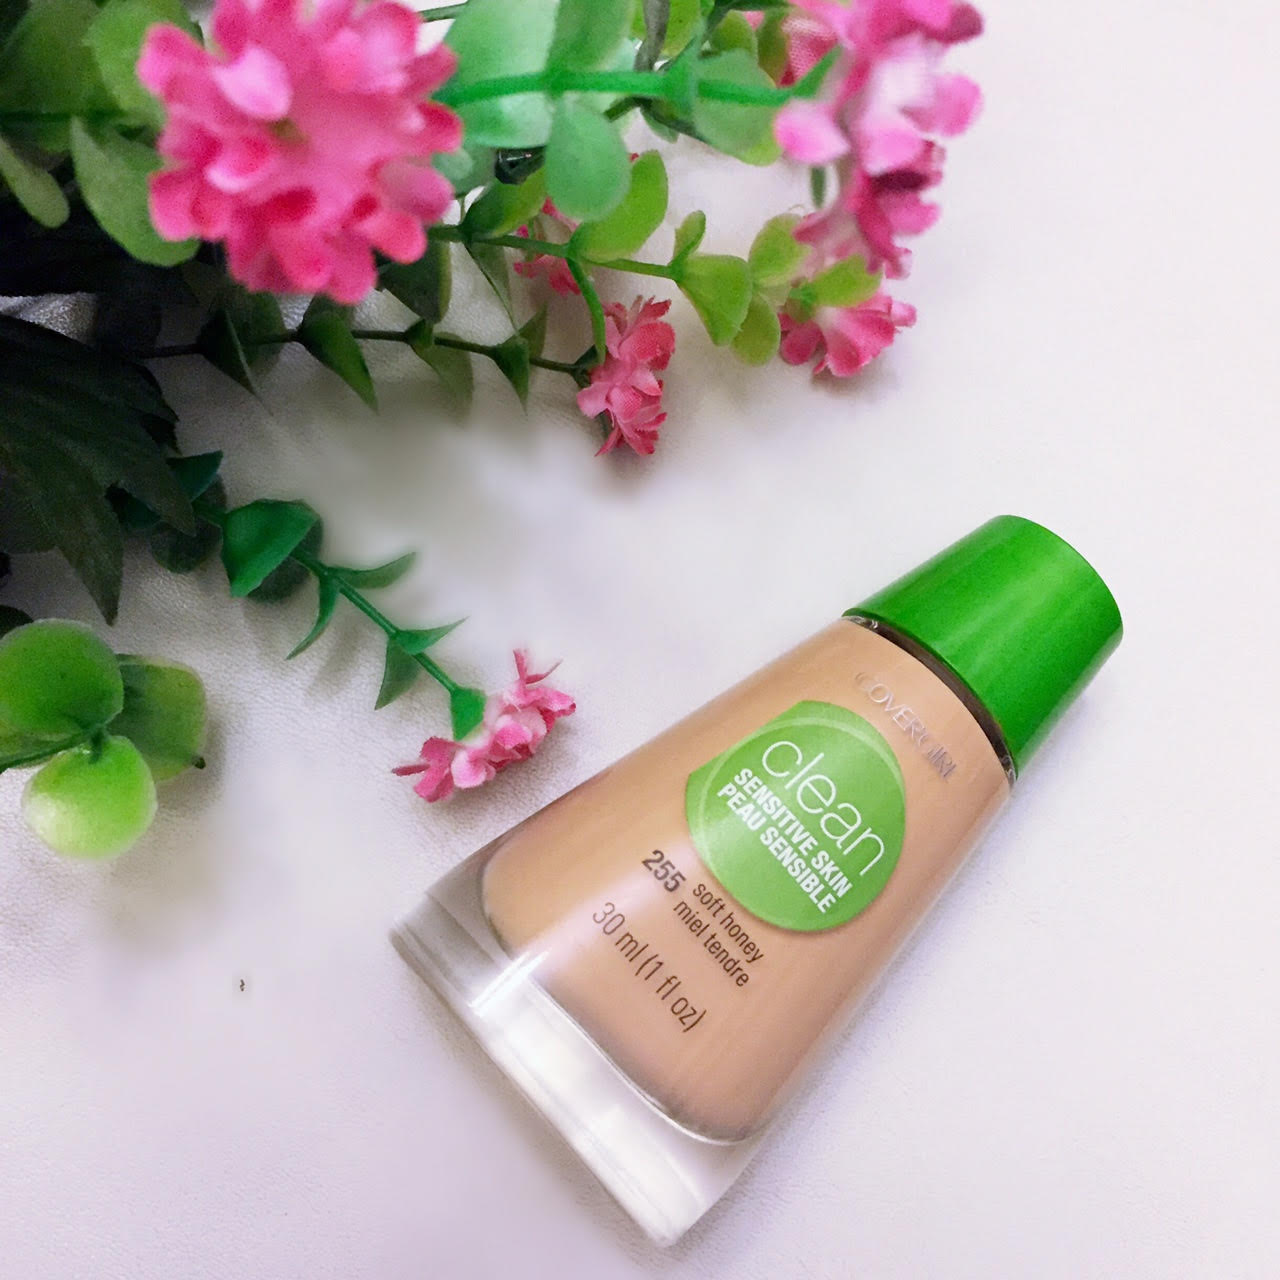 Covergirl Clean Foundation Review